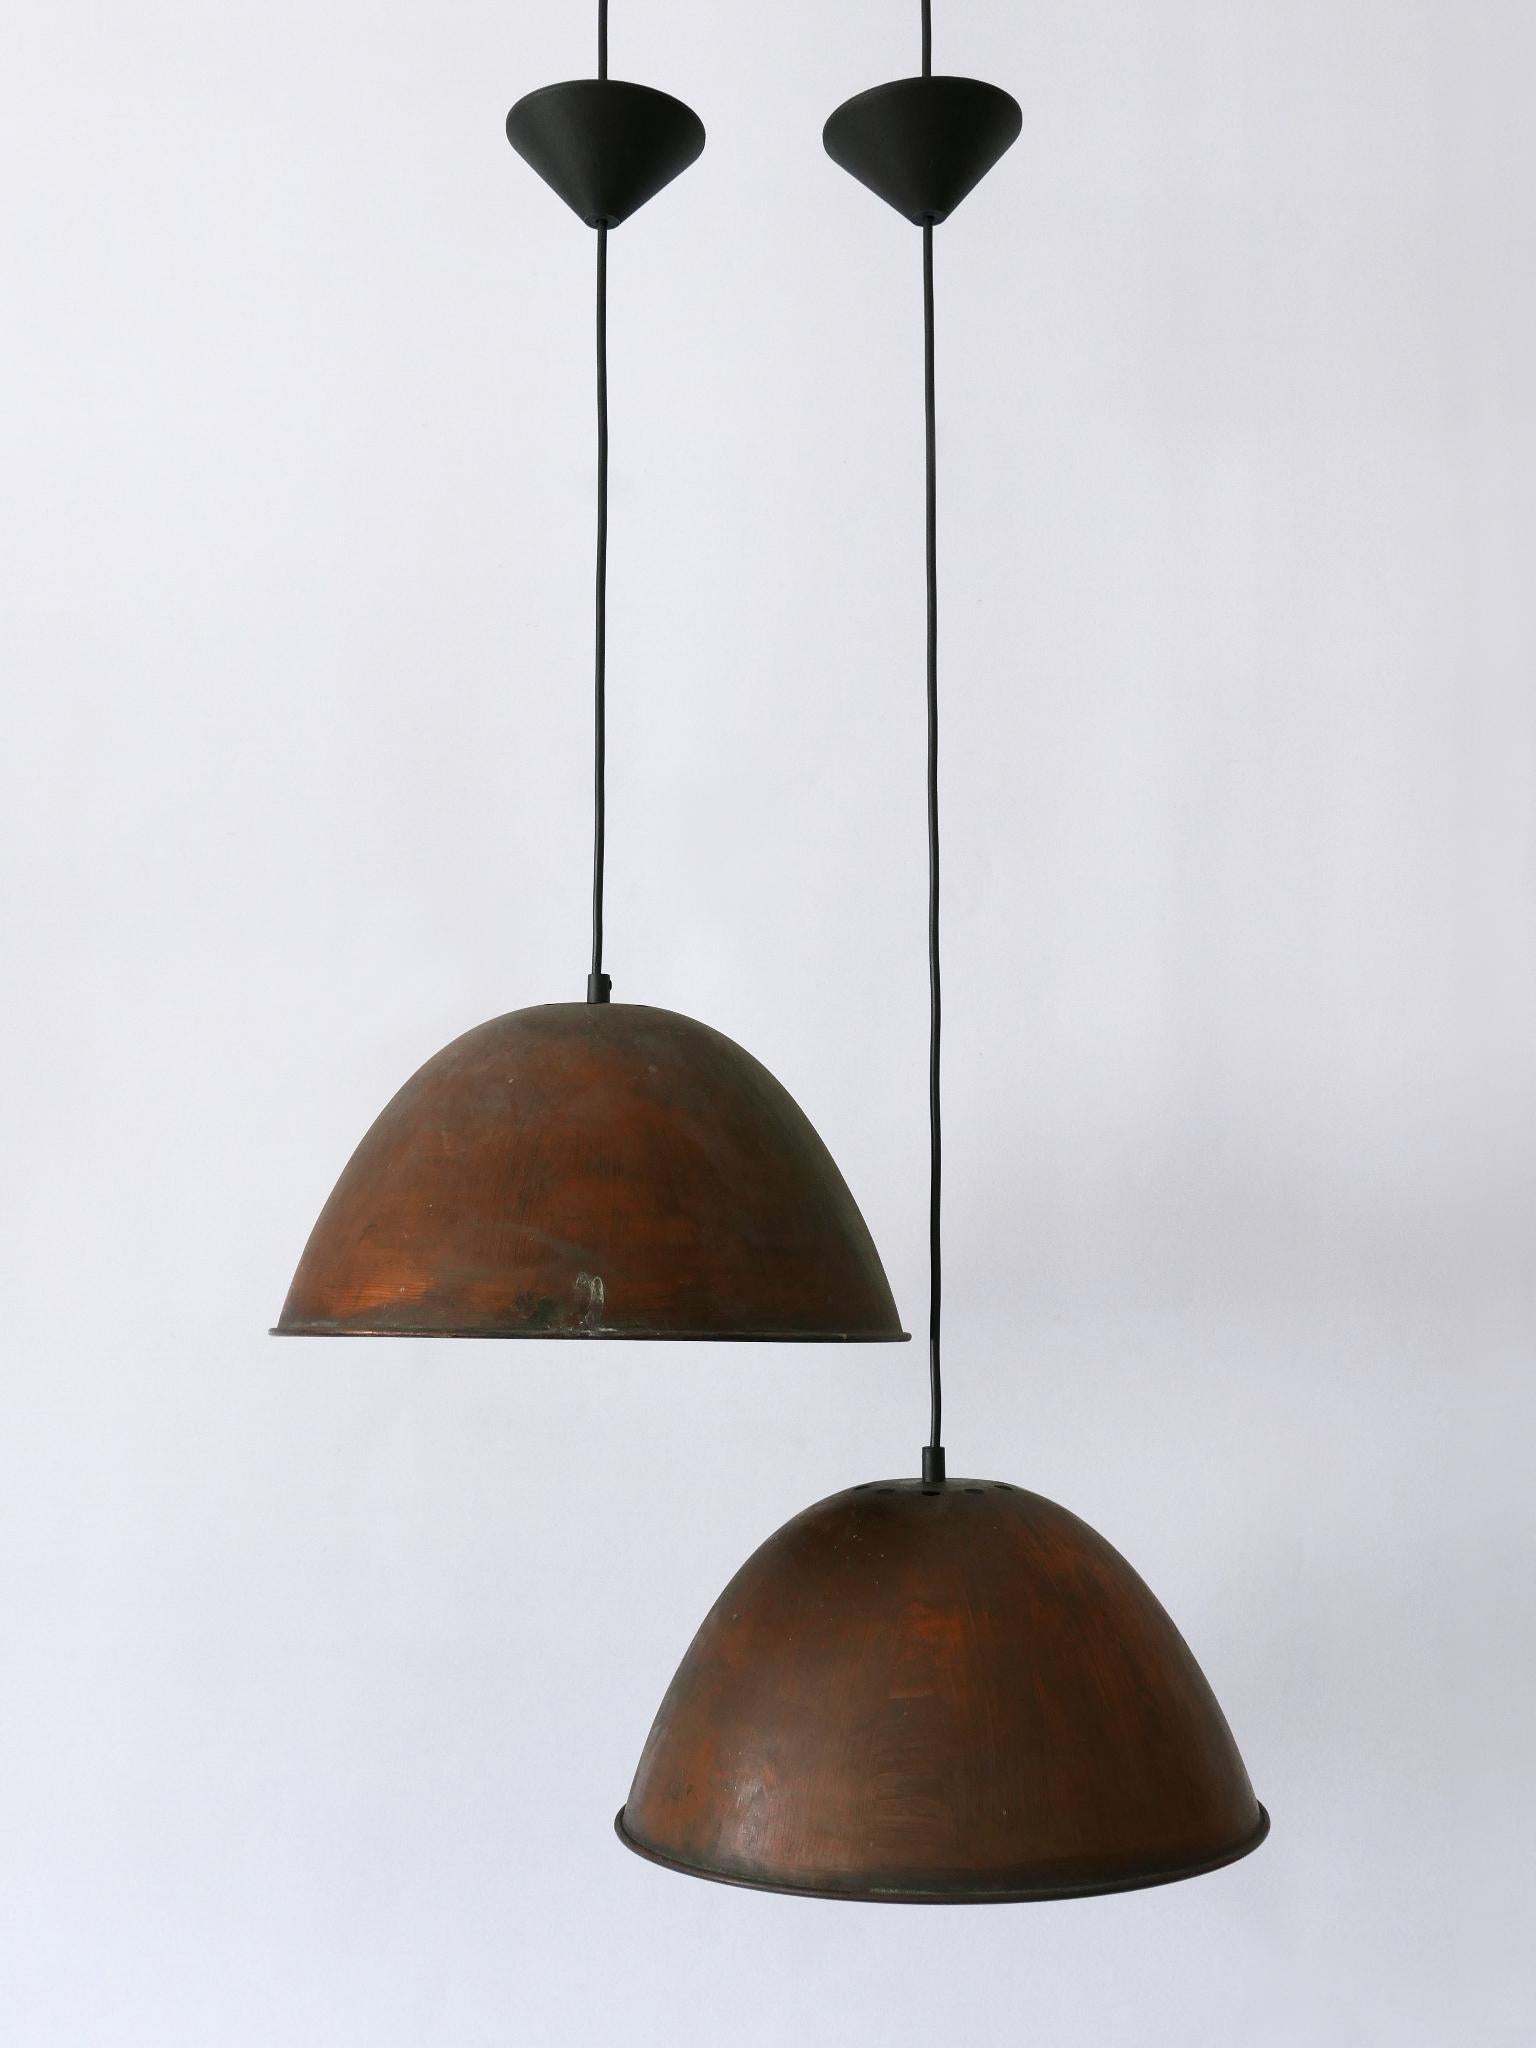 German Set of Two Mid-Century Modern Copper Pendant Lamps or Hanging Lights 1950s For Sale